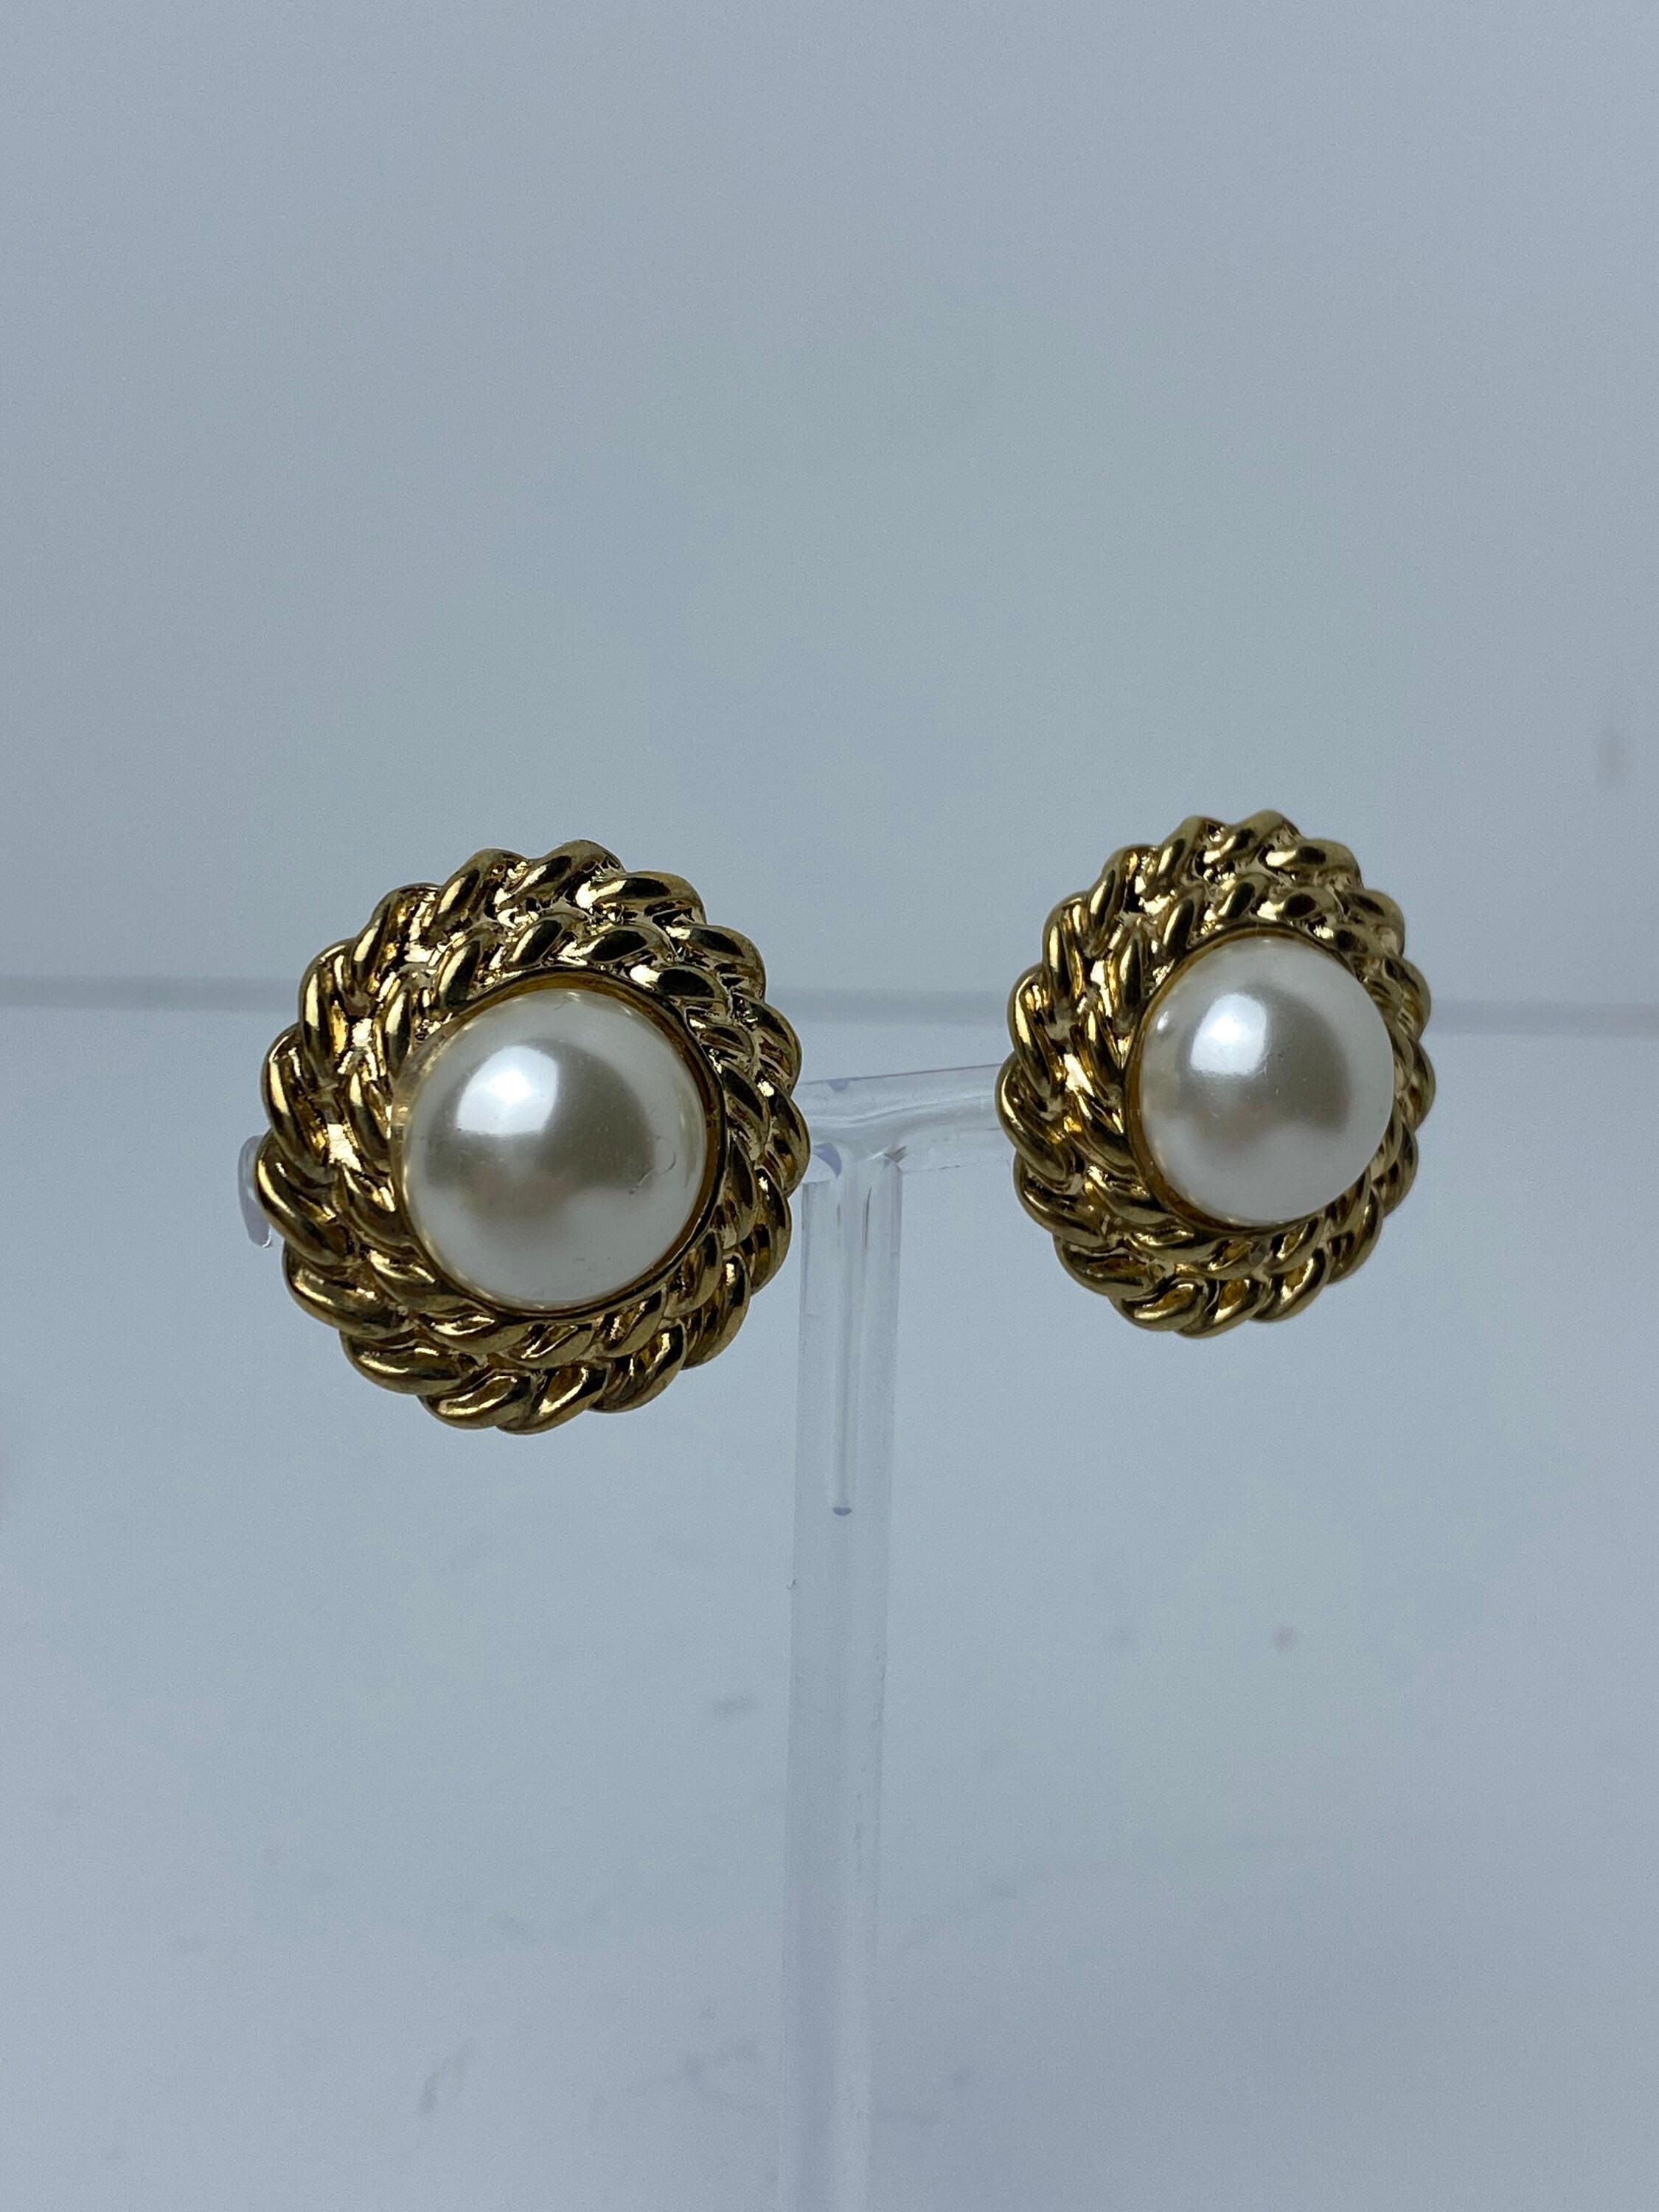 Floral Pearl Trim Golden Earrings - Retro, Indie and Unique Fashion